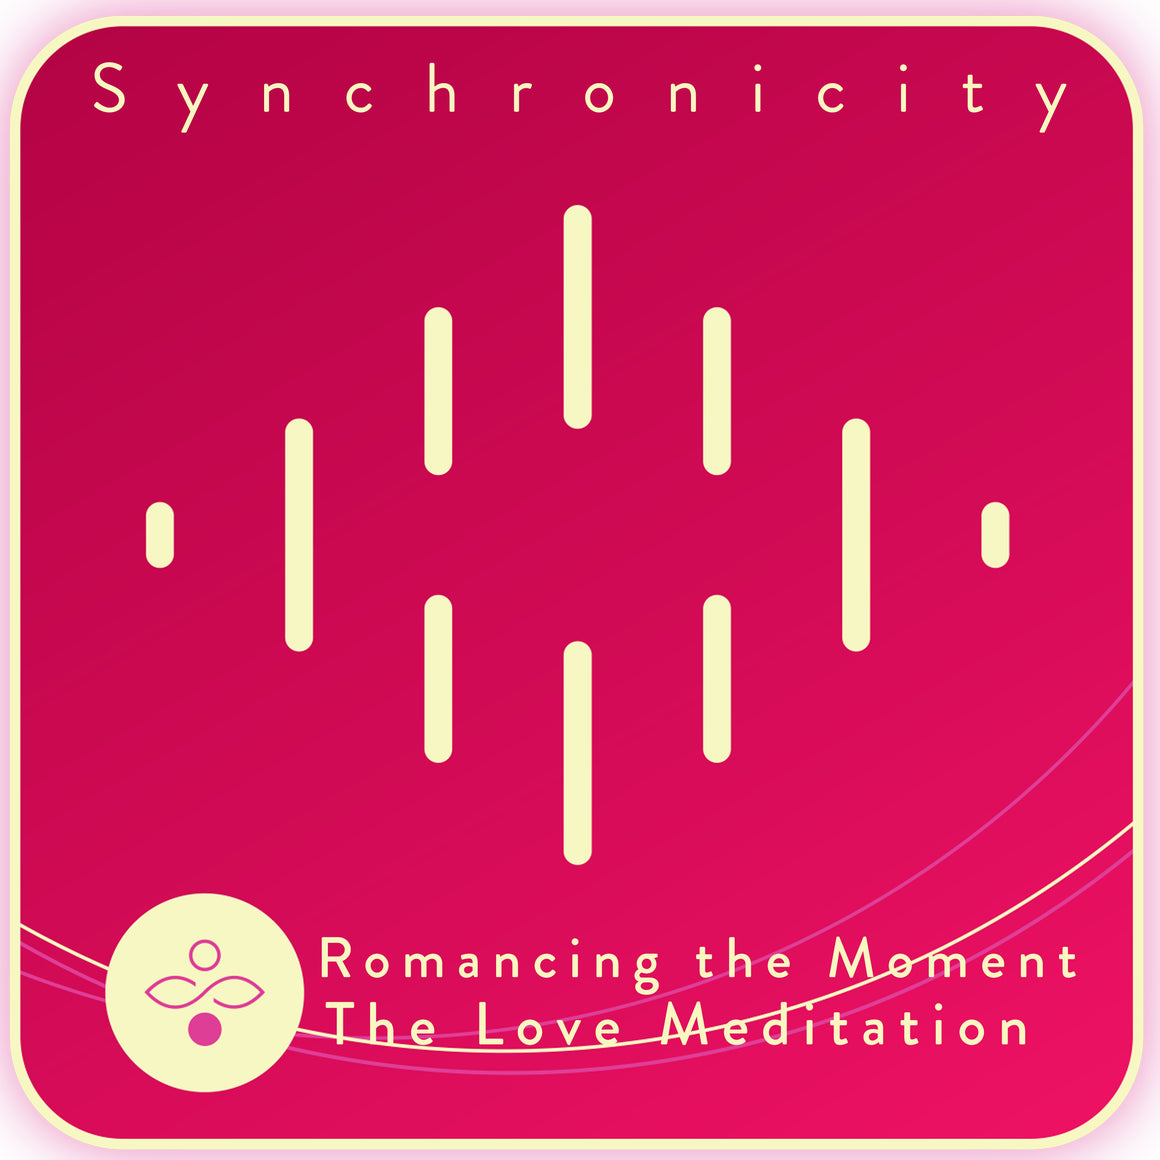 Romancing the Moment - The Love Meditation